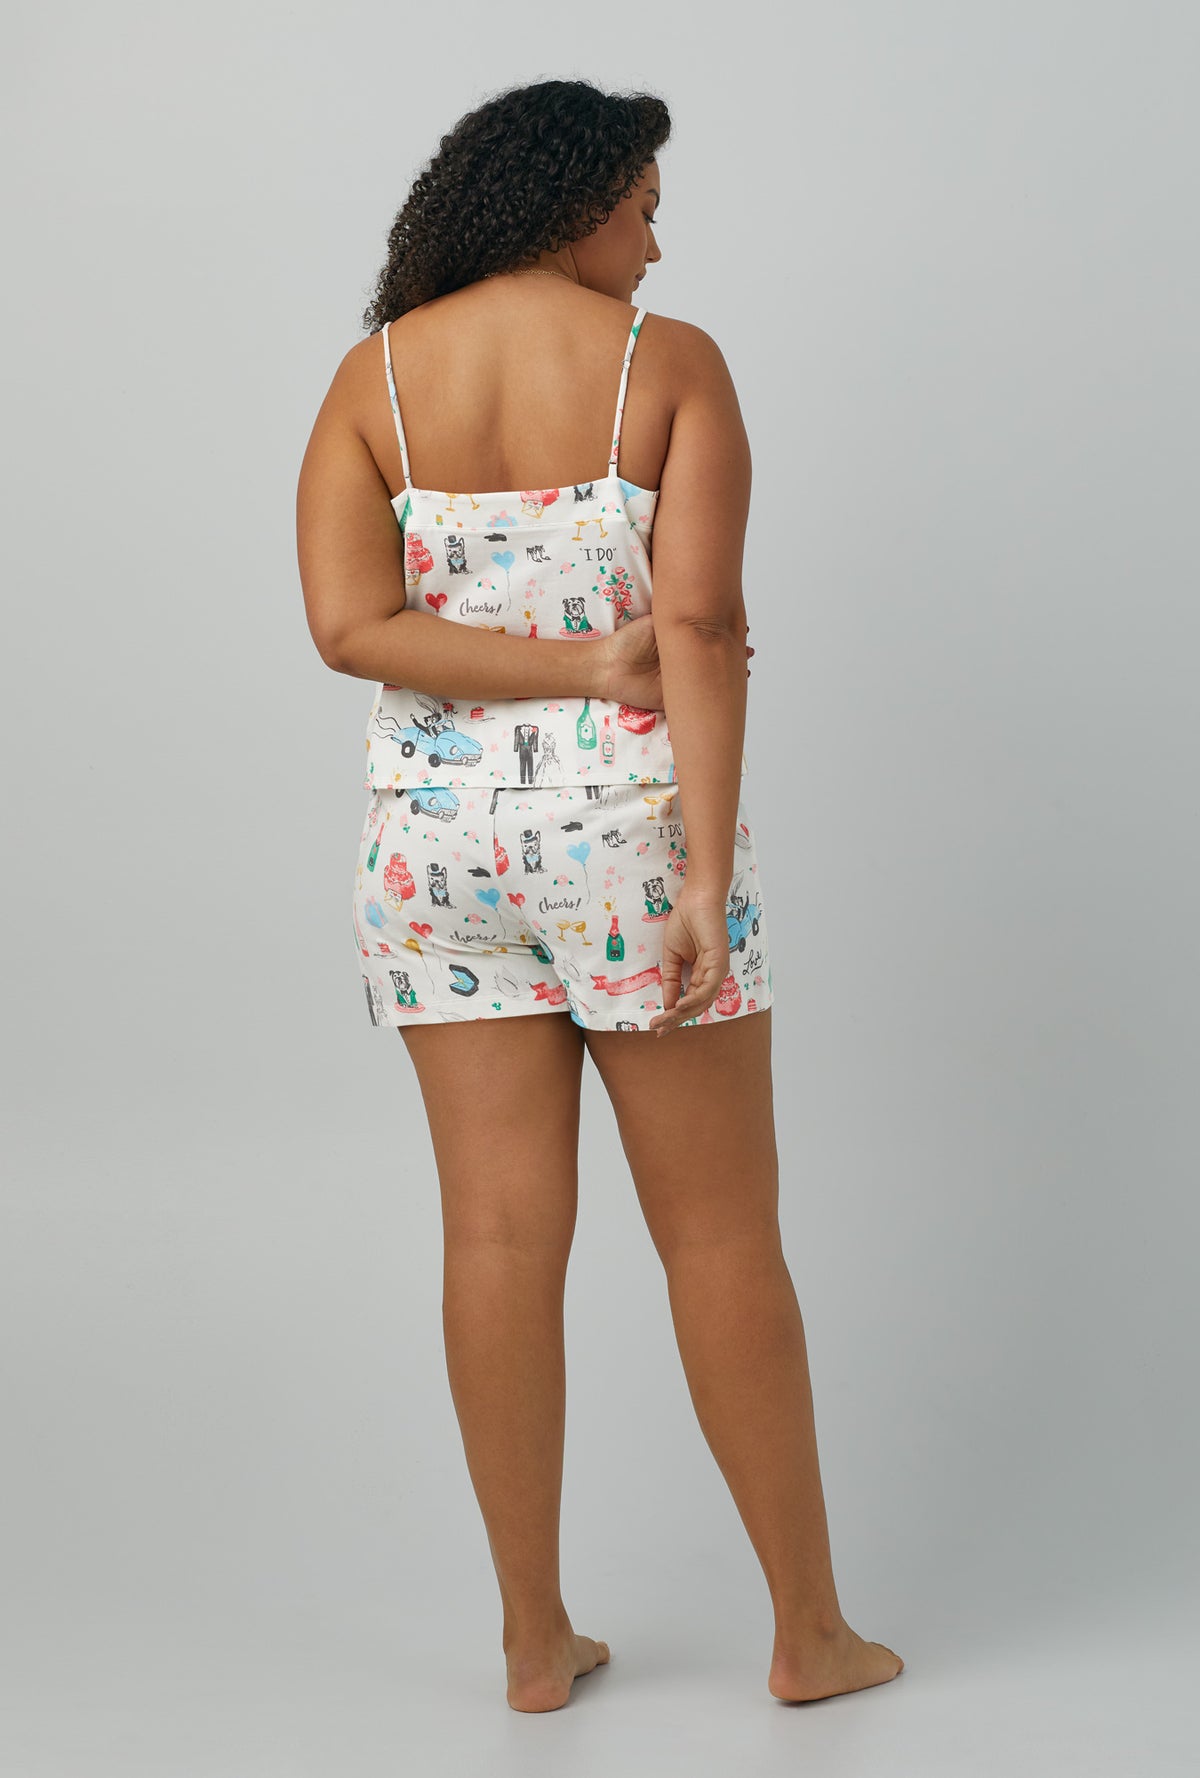 A lady wearing Cami Stretch Jersey Shorty PJ Set with just married print